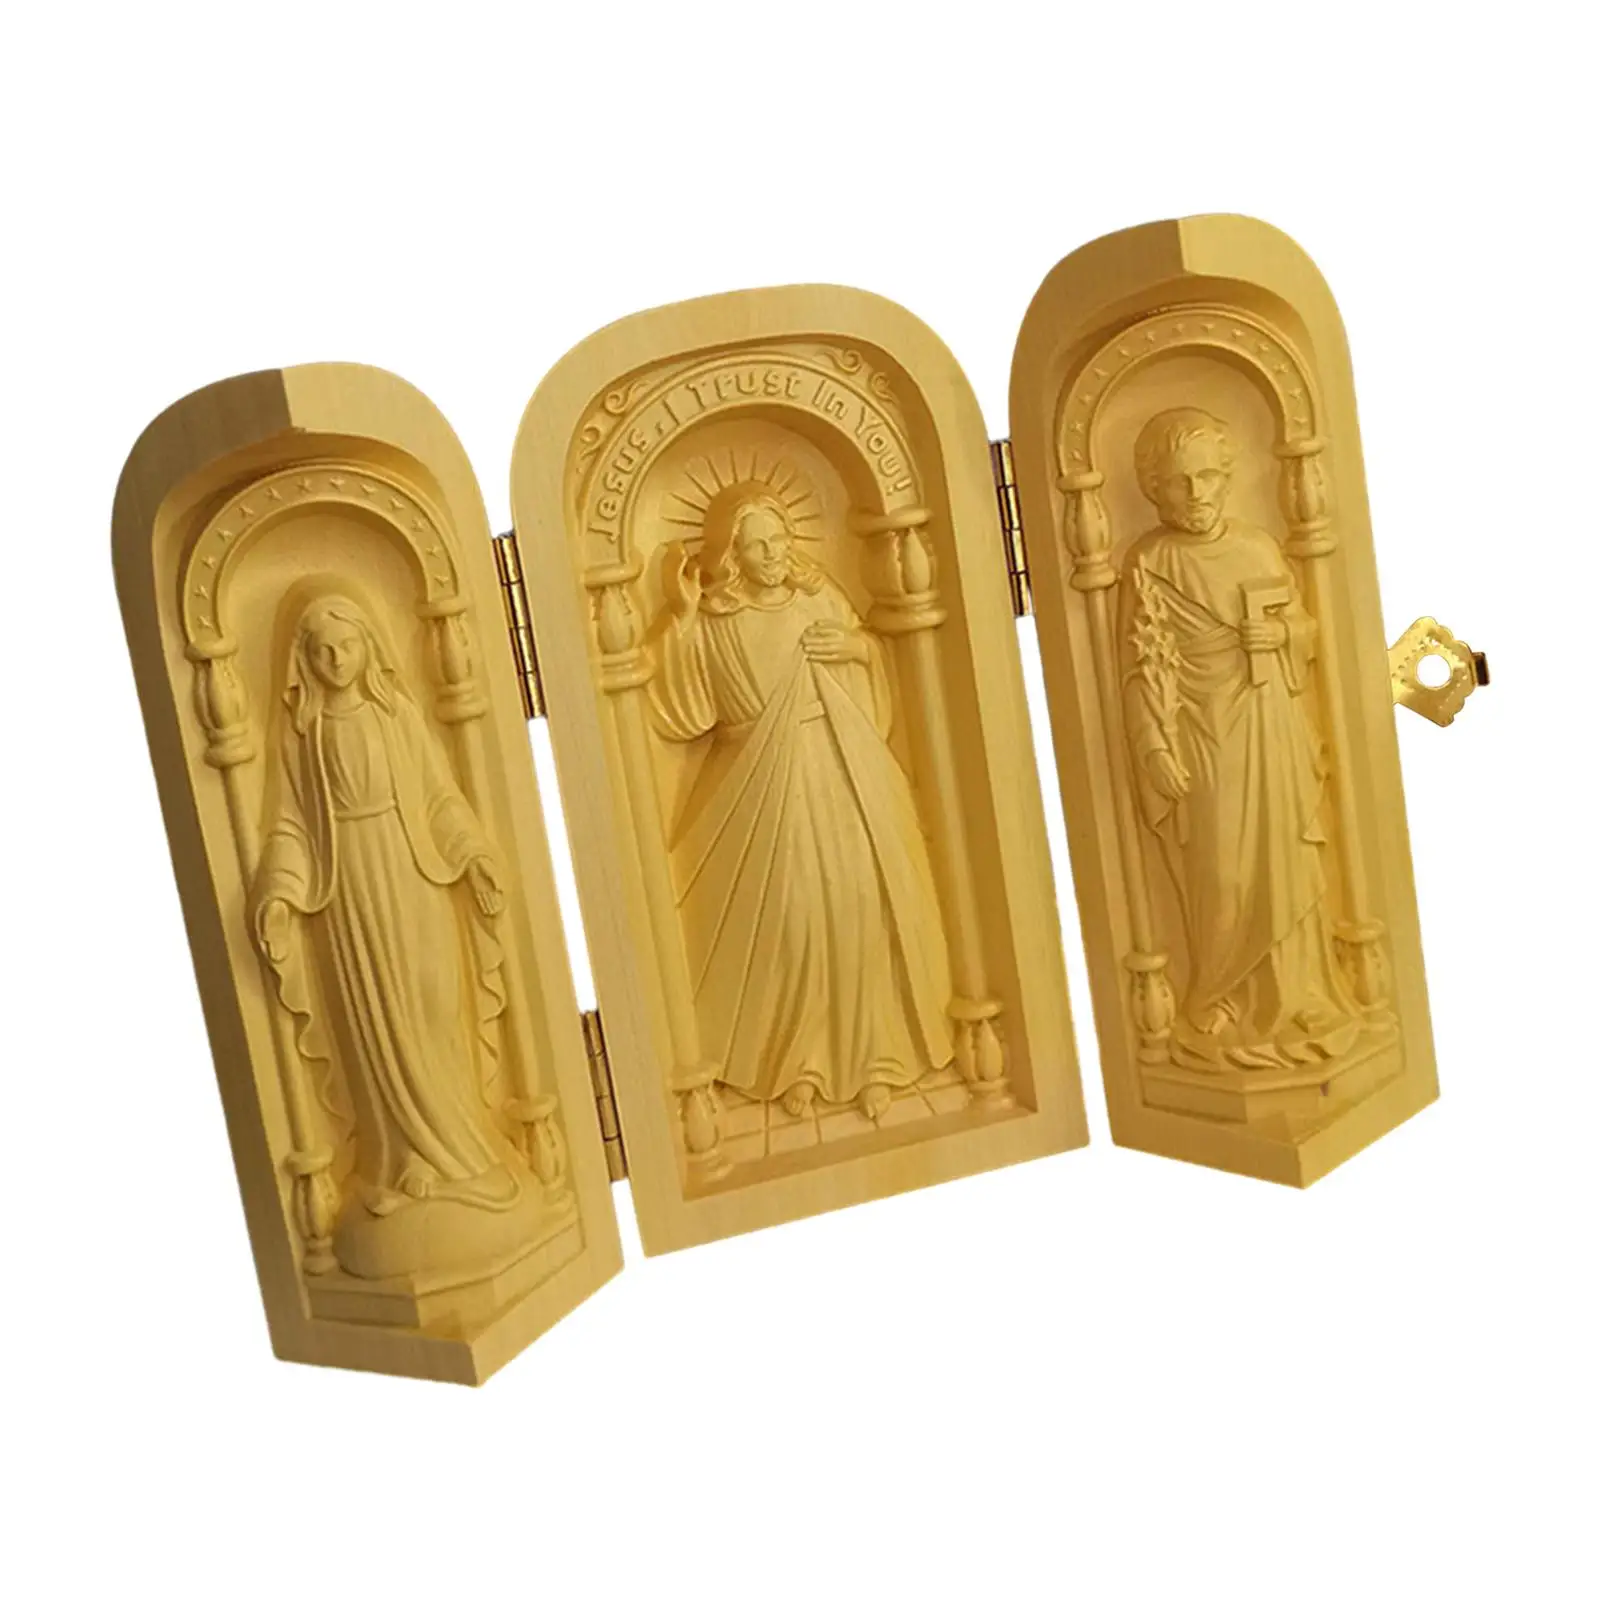 Wood Carving Ornaments Small Catholic Religious Ornament Sculpture Catholic Relics for Table Home Bedroom Office Catholic